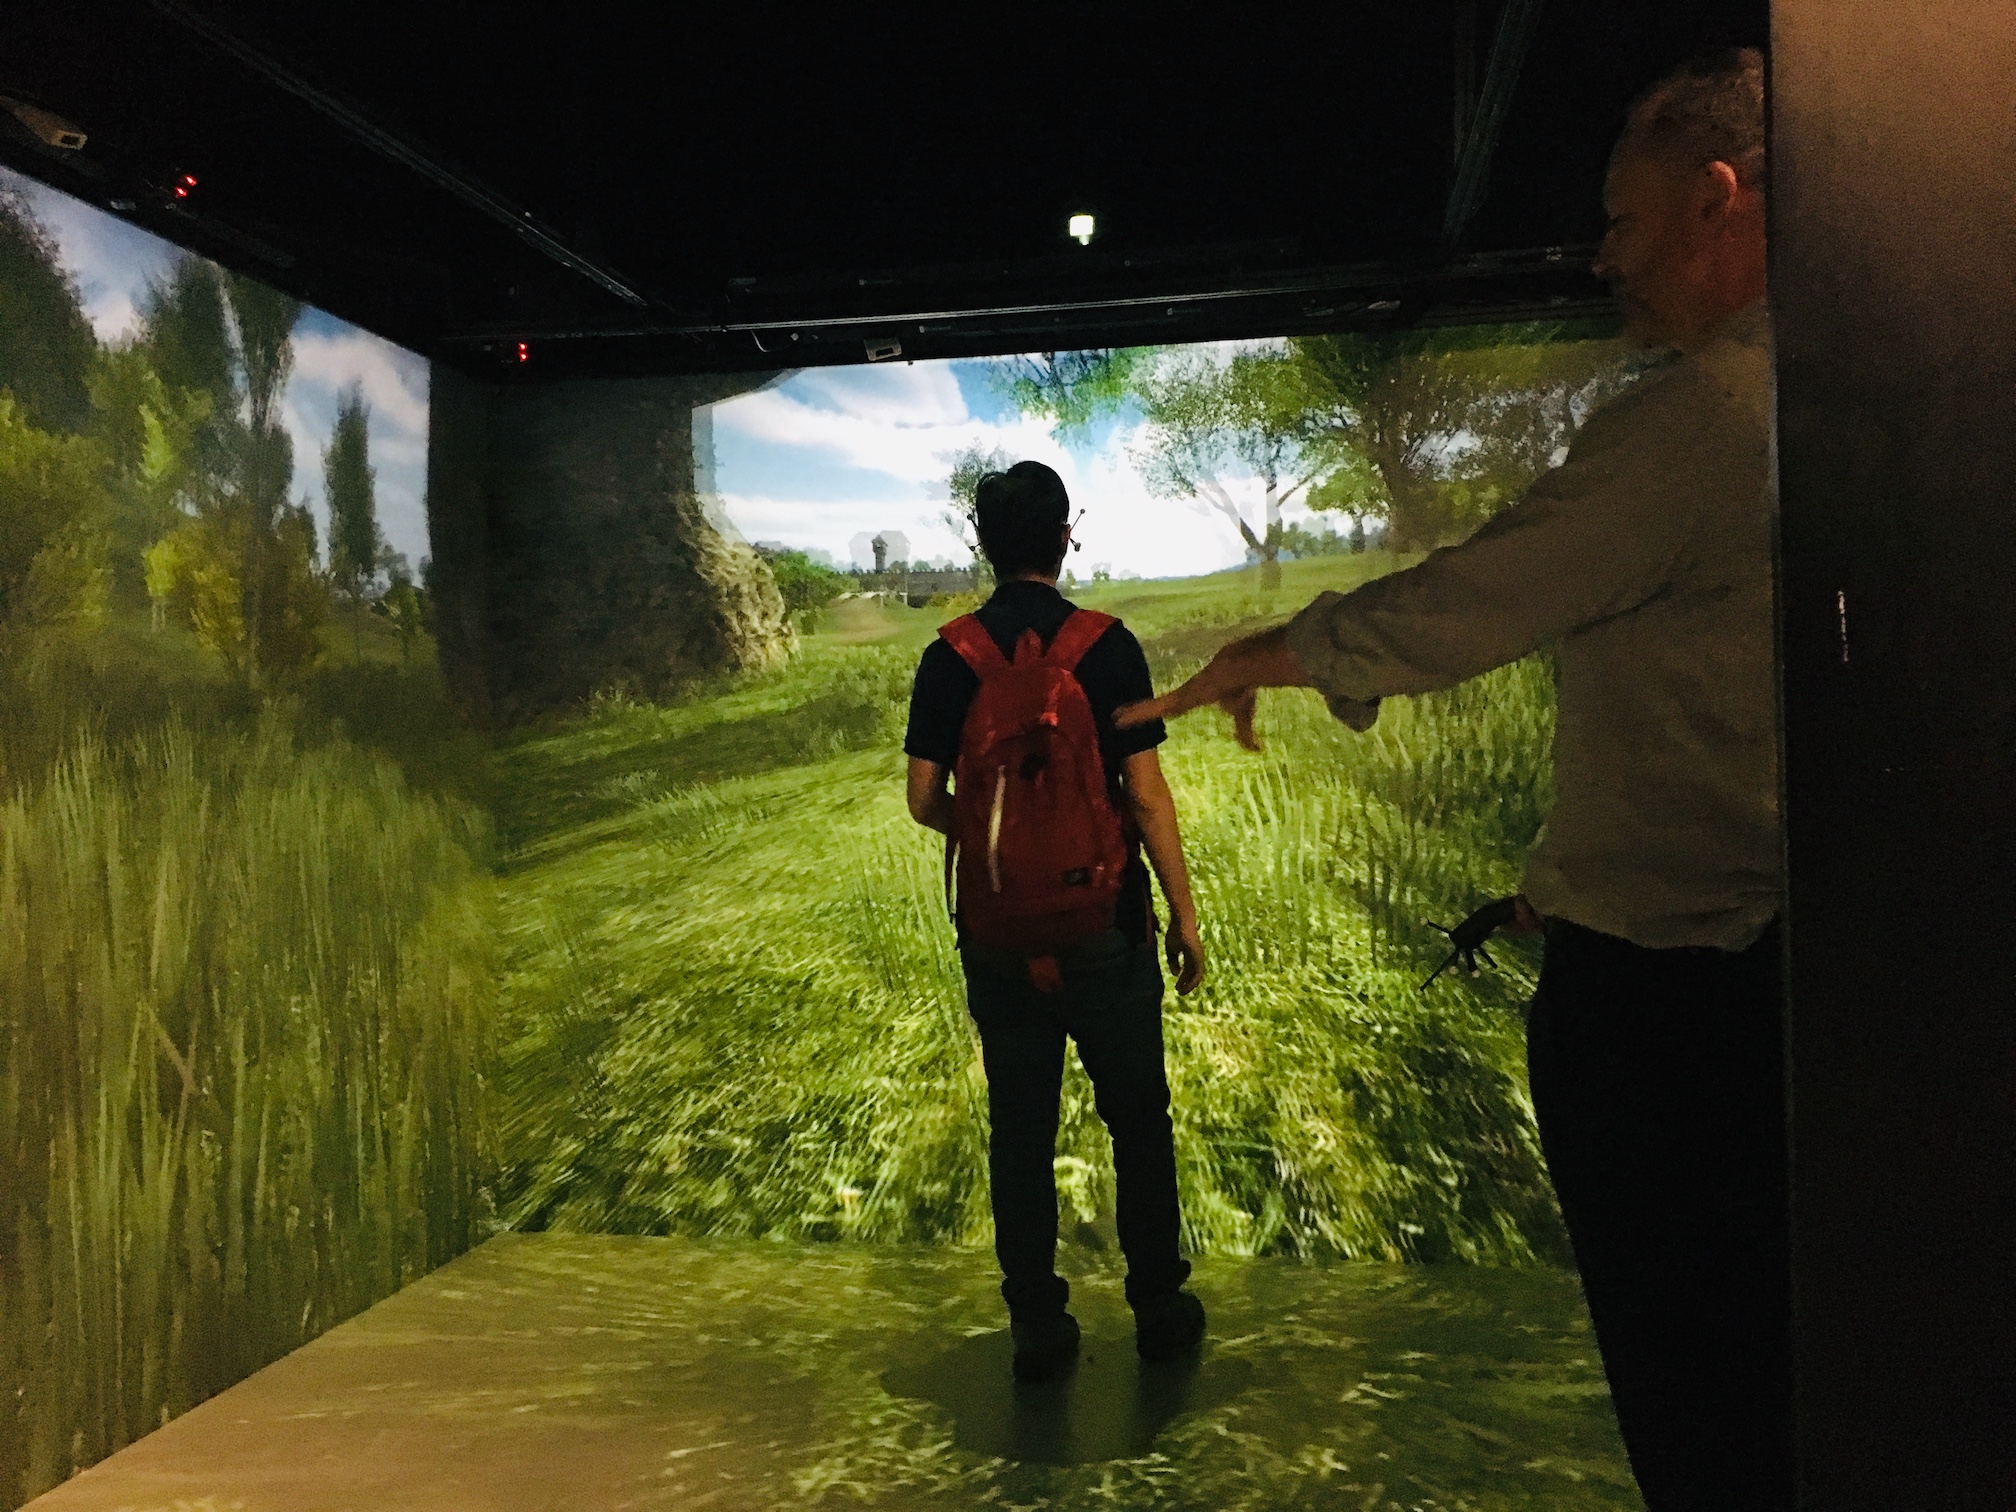 Student wearing backpack using virtual reality cave  displaying an open field landscape with tutor pictured to the side.